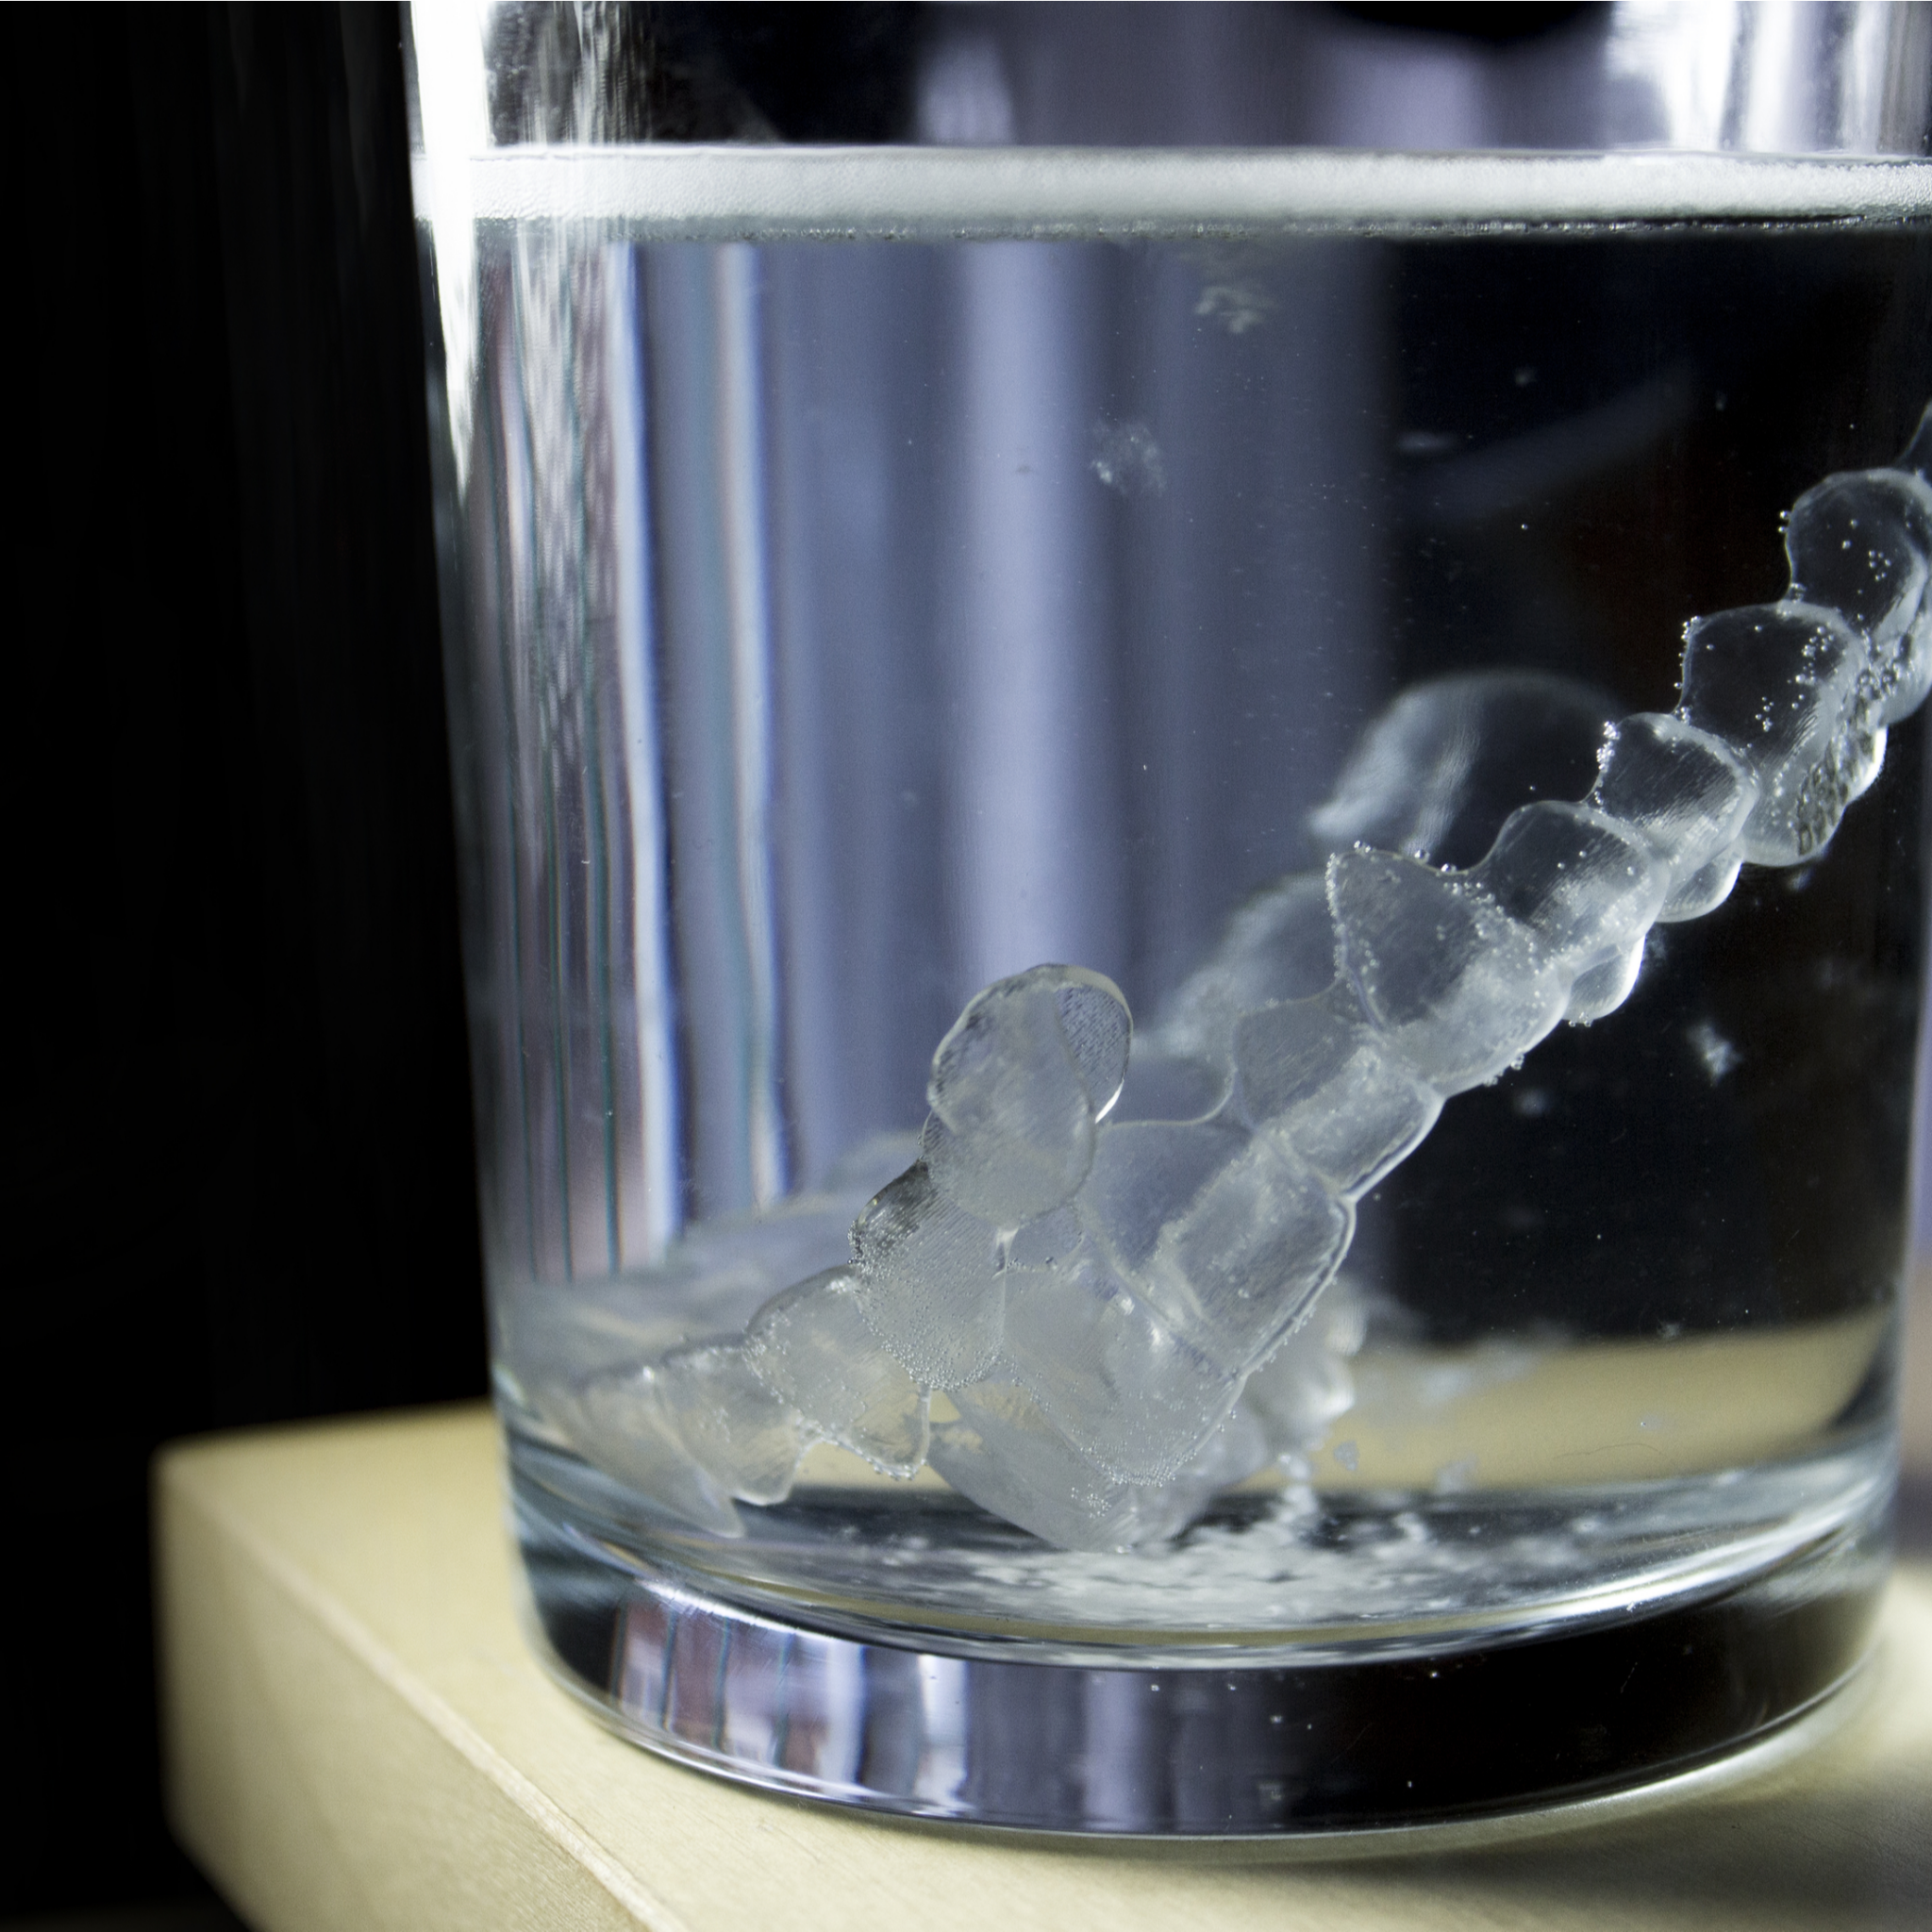 aligners soaking in a glass of water